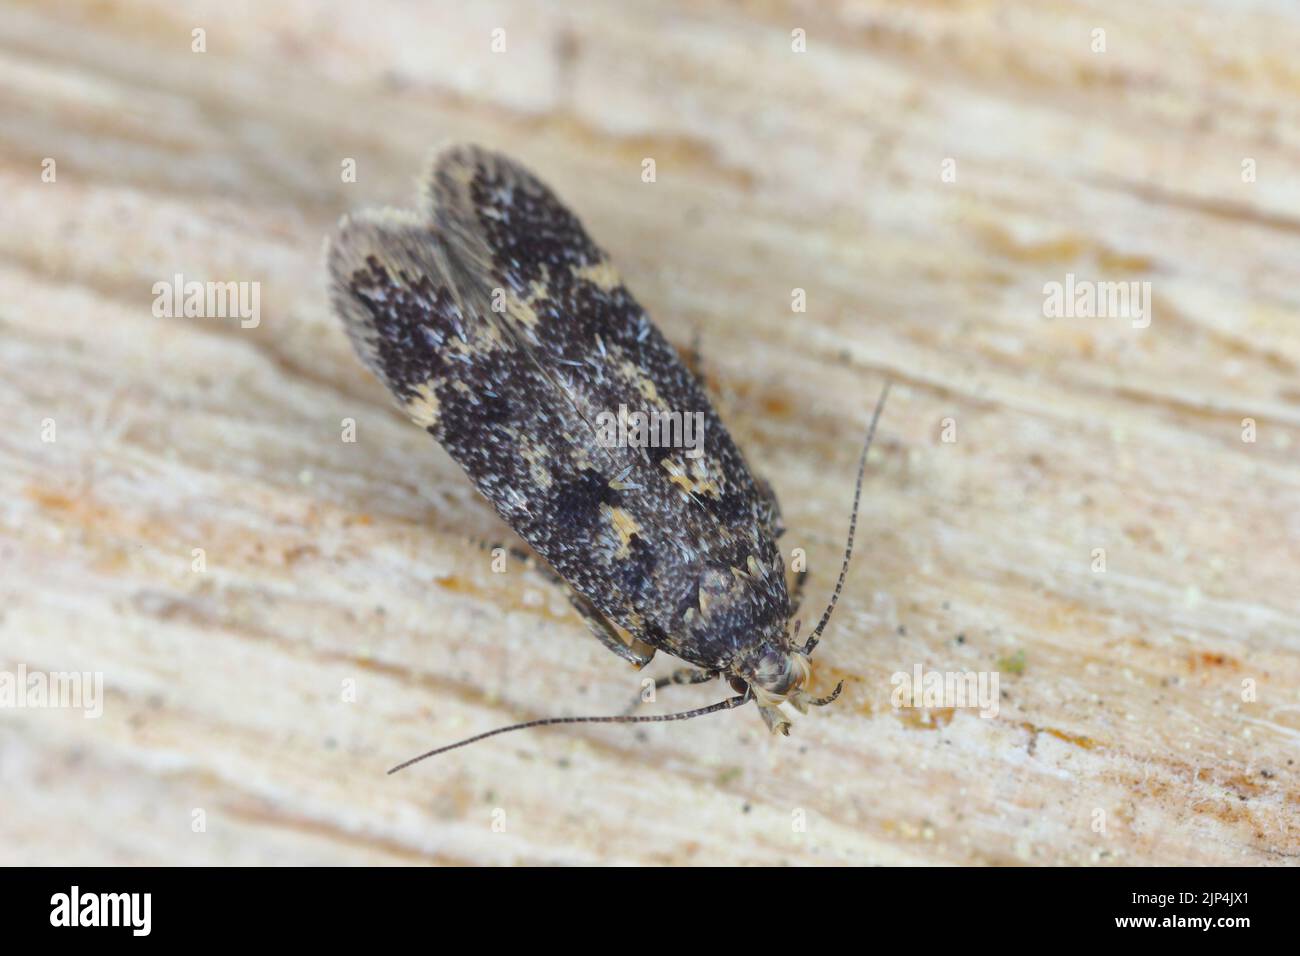 A tiny moth from the family Gelechiidae commonly referred to as twirler moths or gelechiid moths. The caterpillars are phytophagous. Stock Photo